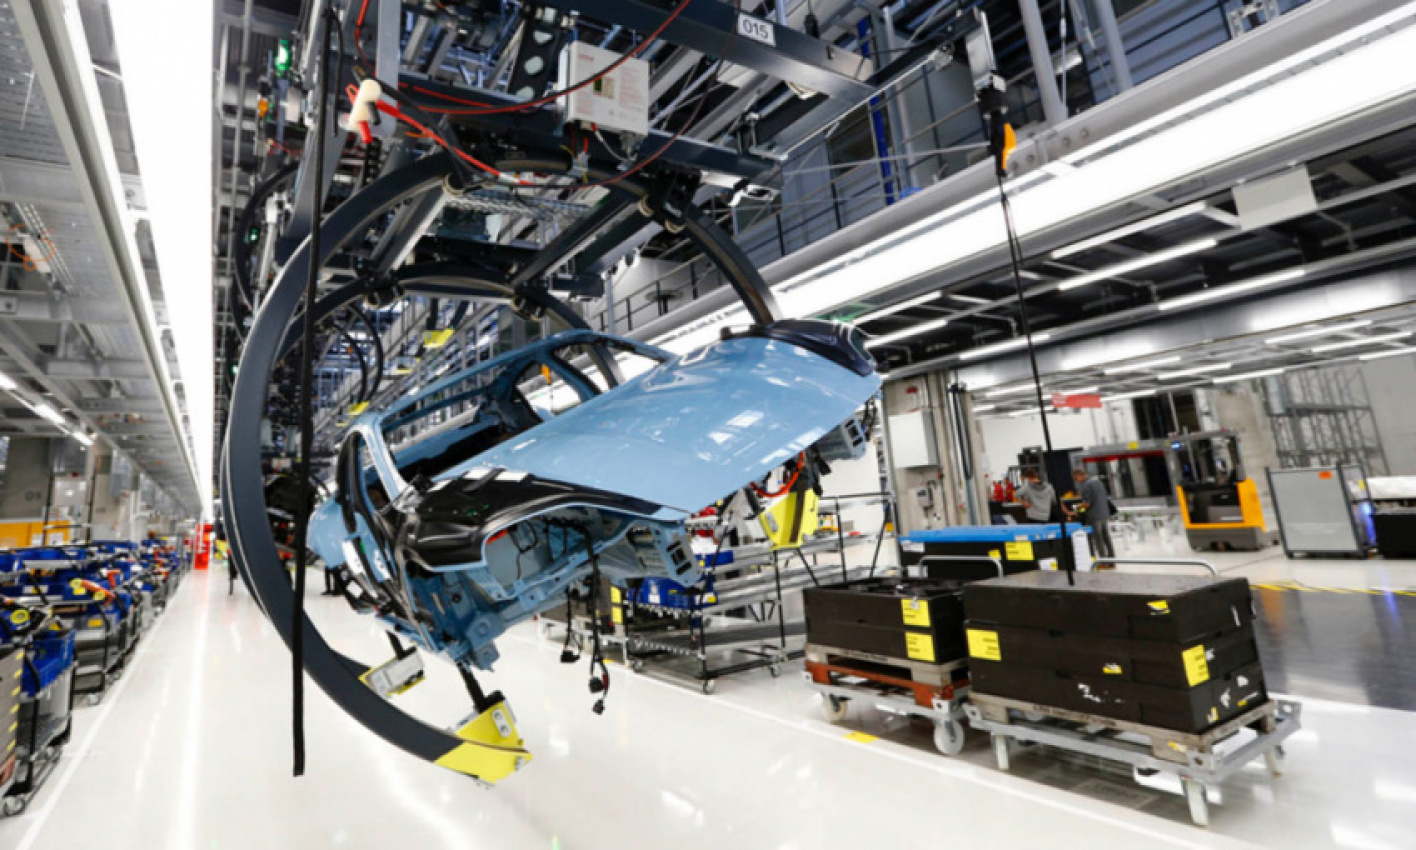 autos, cars, industry news, porsche, ev, industry news, porsche 718, porsche 718 ev, porsche ev, zuffenhausen, zuffenhausen plant, electric porsche 718 to be produced at zuffenhausen plant after $567m investment